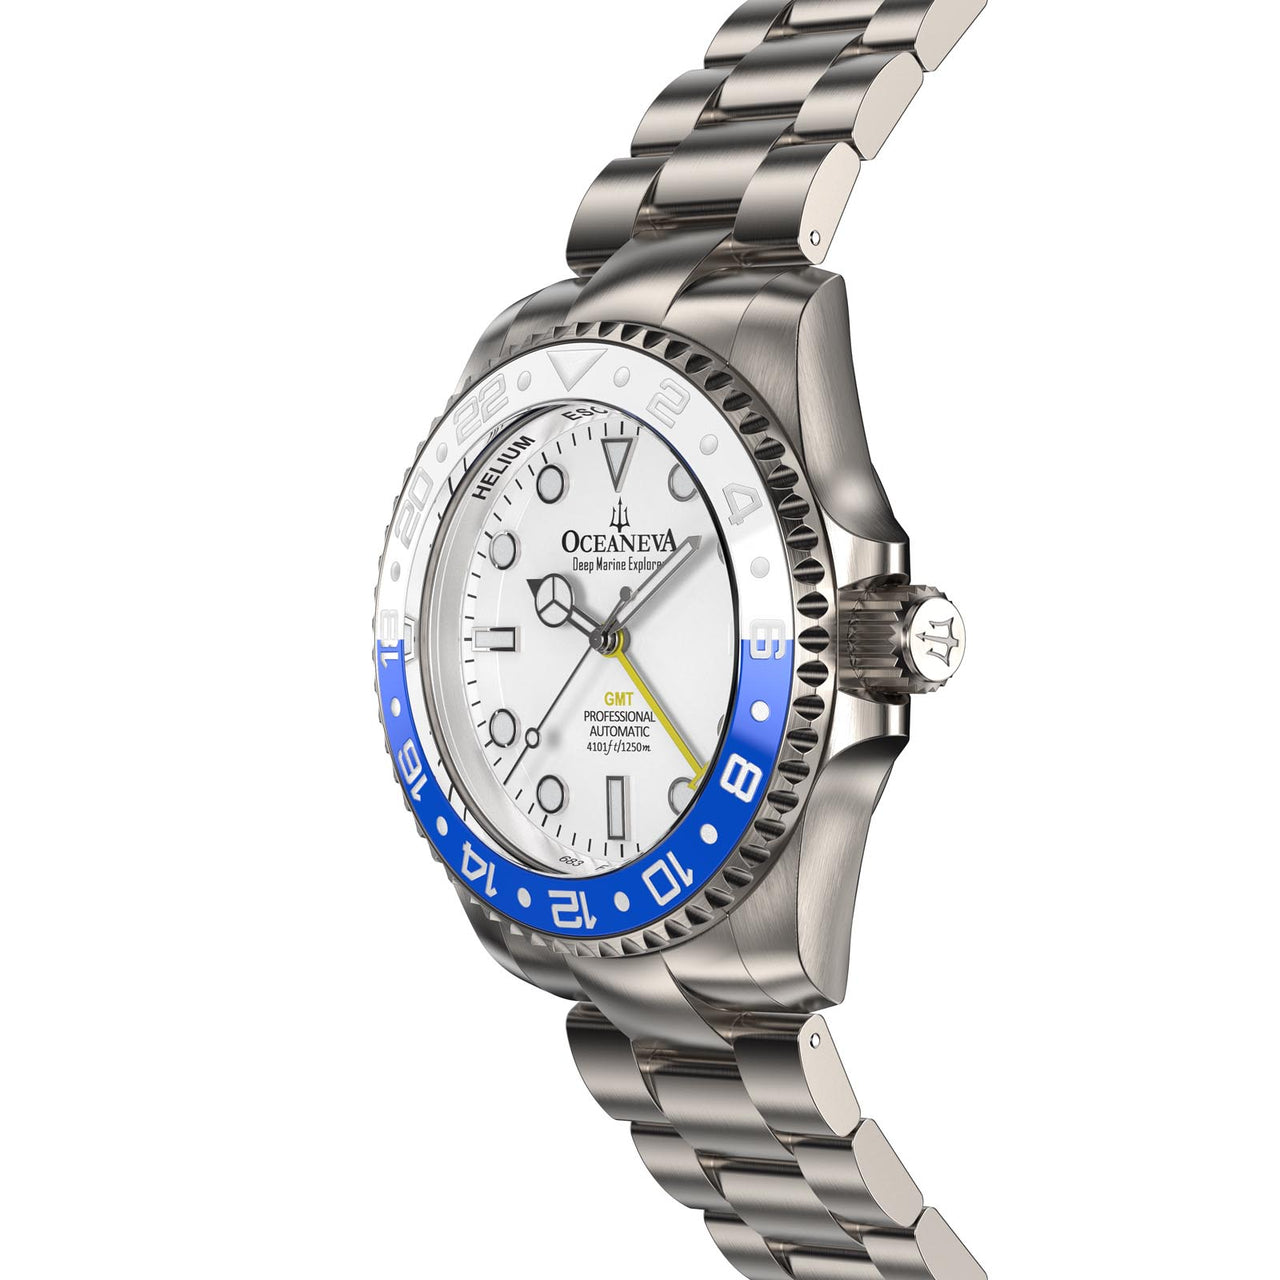 Luxurious Oceaneva Titanium Watch set for presale with special price offer